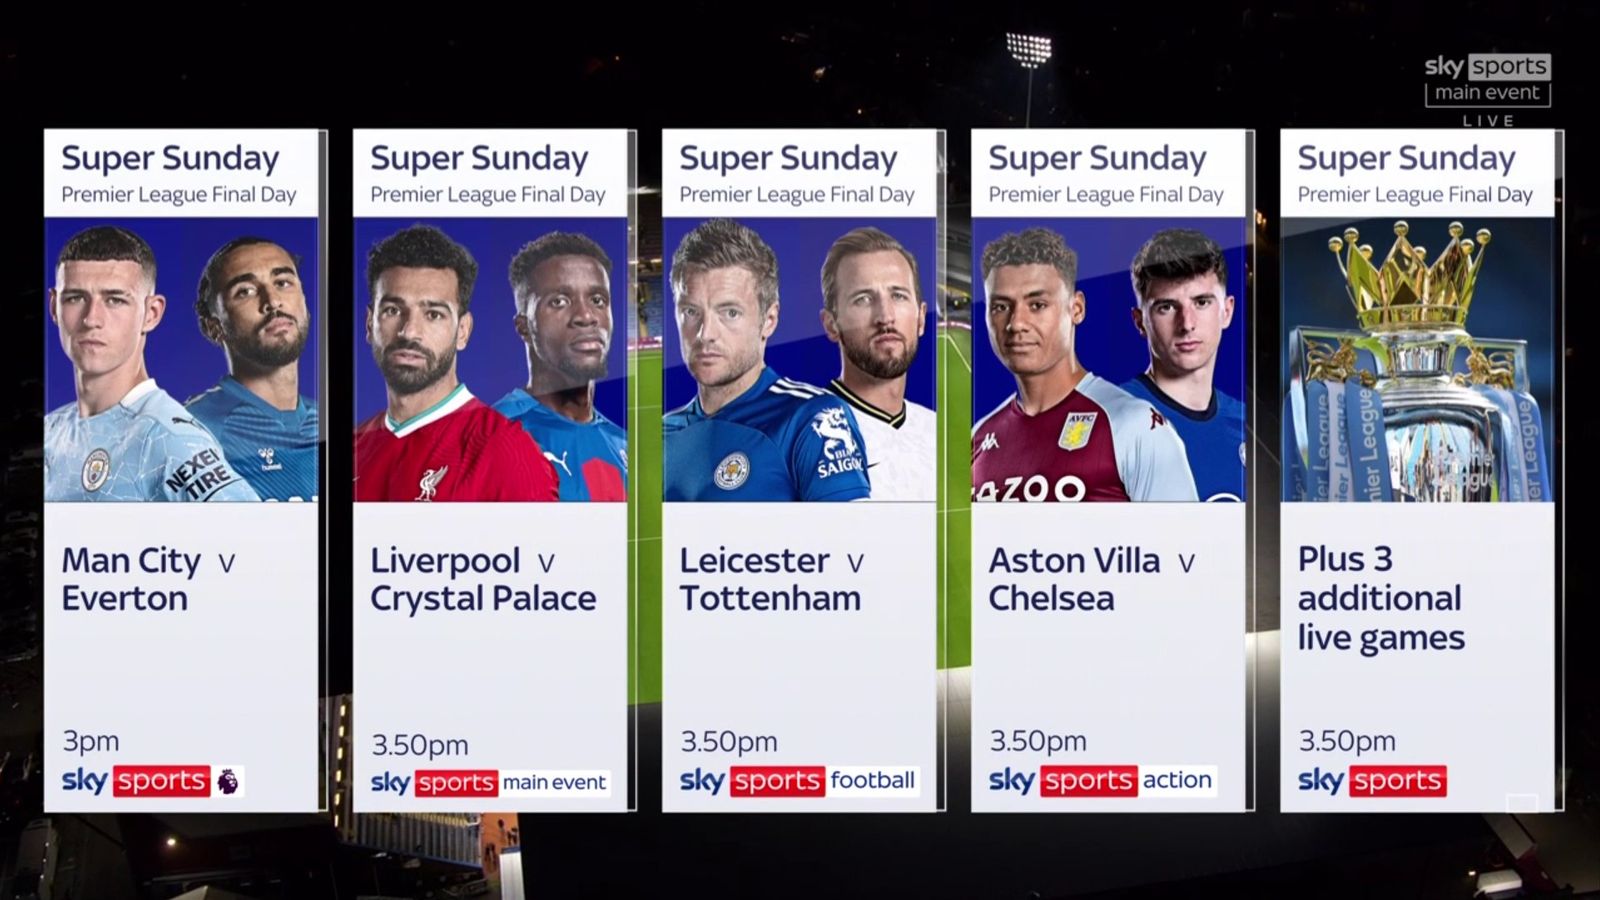 Premier League live on Sky Sports fixtures, dates and kickoff times